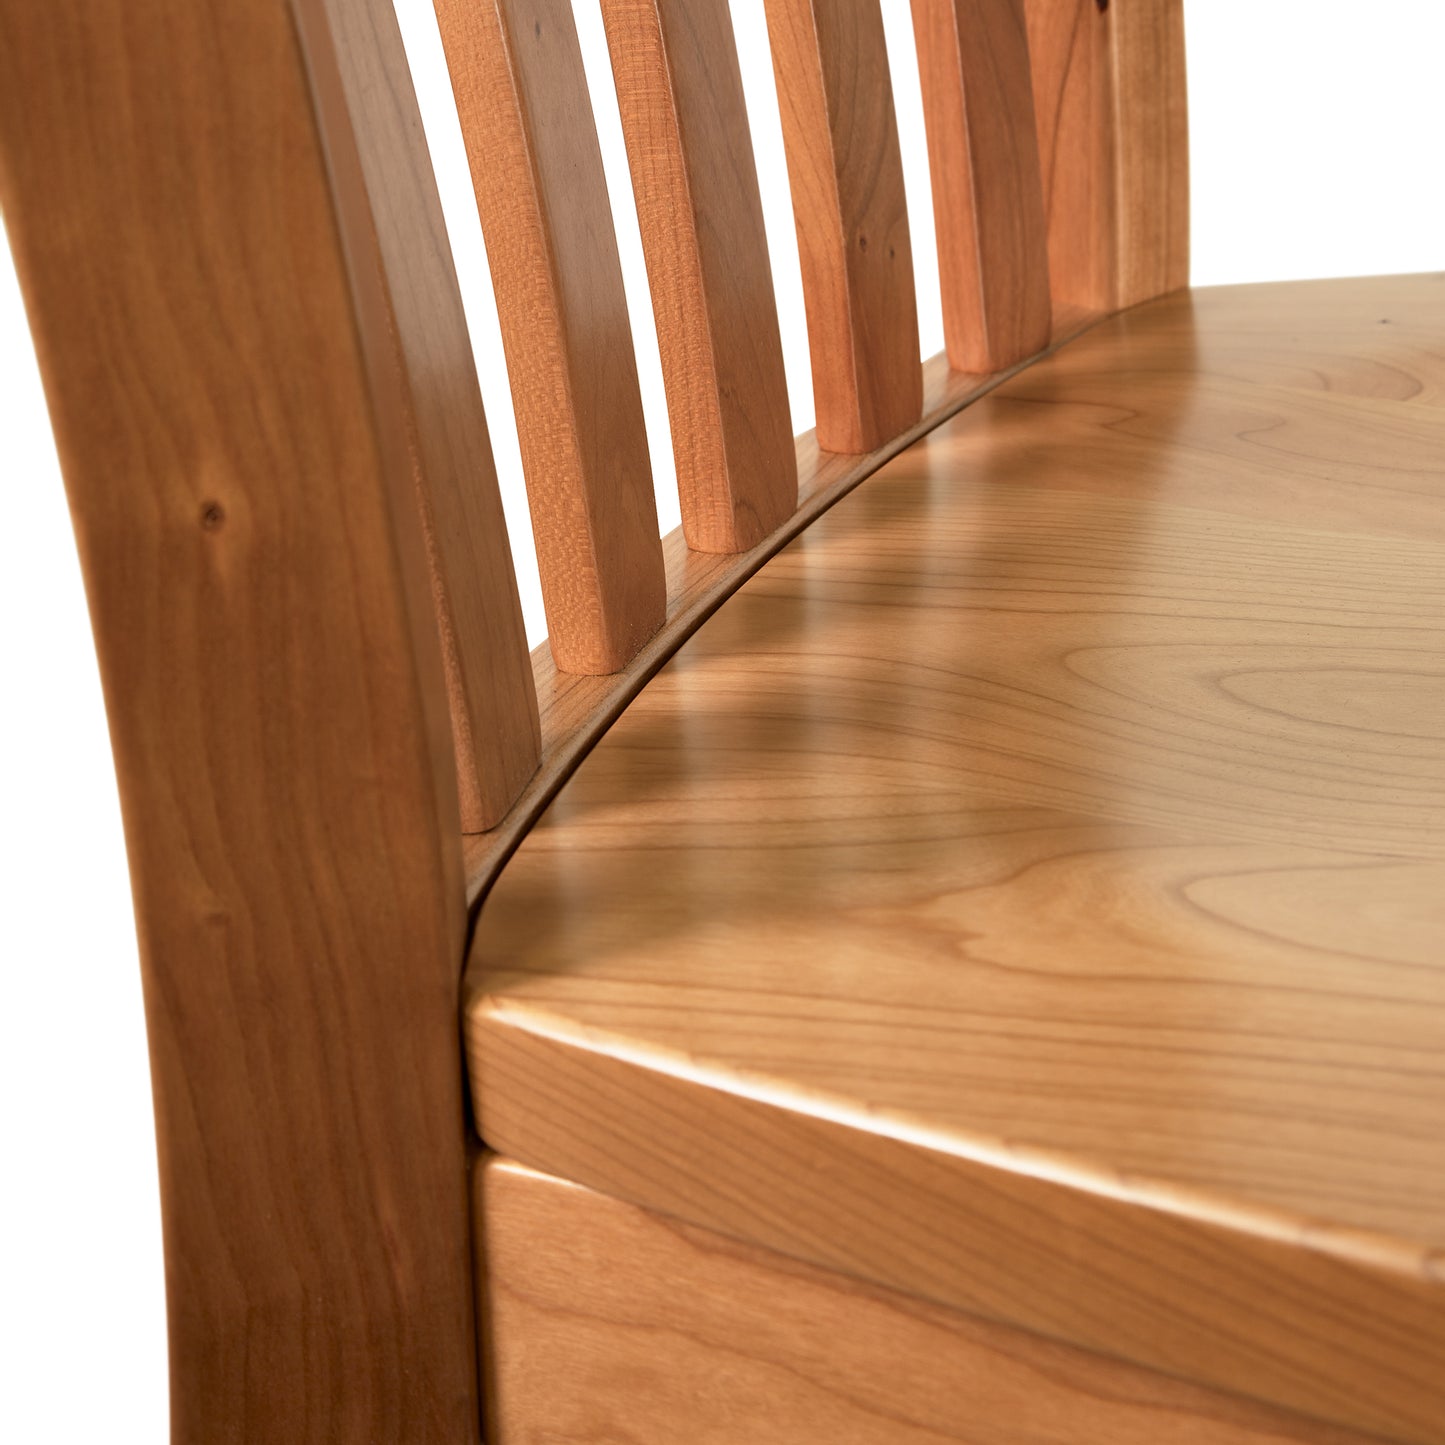 Close-up of a Vermont Woods Studios Country Shaker Chair with Wood Seat with a slatted back and a smooth, curved seat, highlighting the grain and natural finish of the wood.